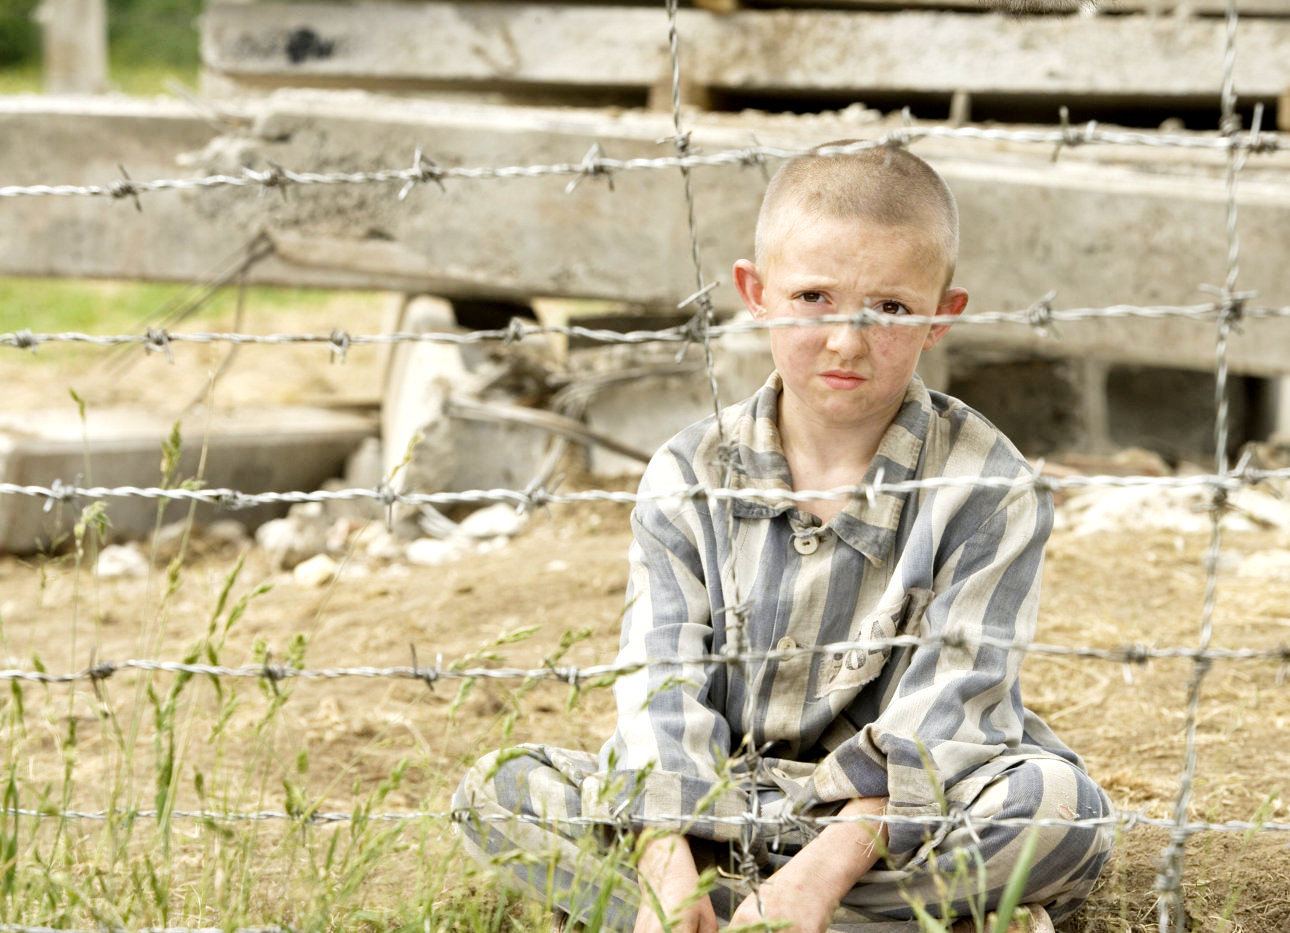 Quotes From The Boy In The Striped Pajamas. QuotesGram